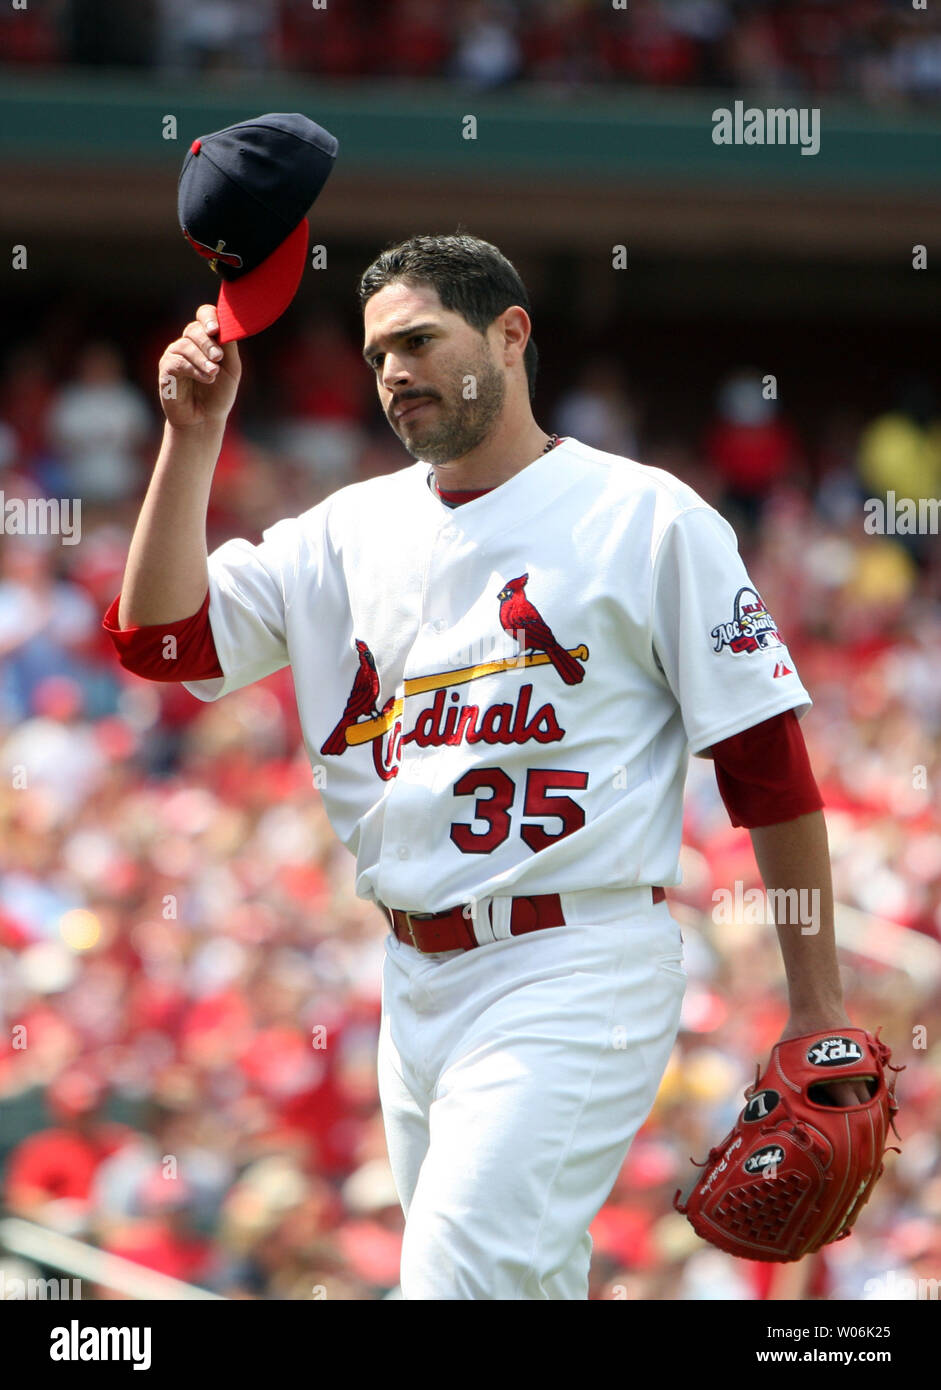 St. Louis Cardinals pitcher Chris Carpenter tips his cap to the cheering  crowd as he leaves the game against the Milwaukee Brewers in the seventh  inning at Busch Stadium in St. Louis